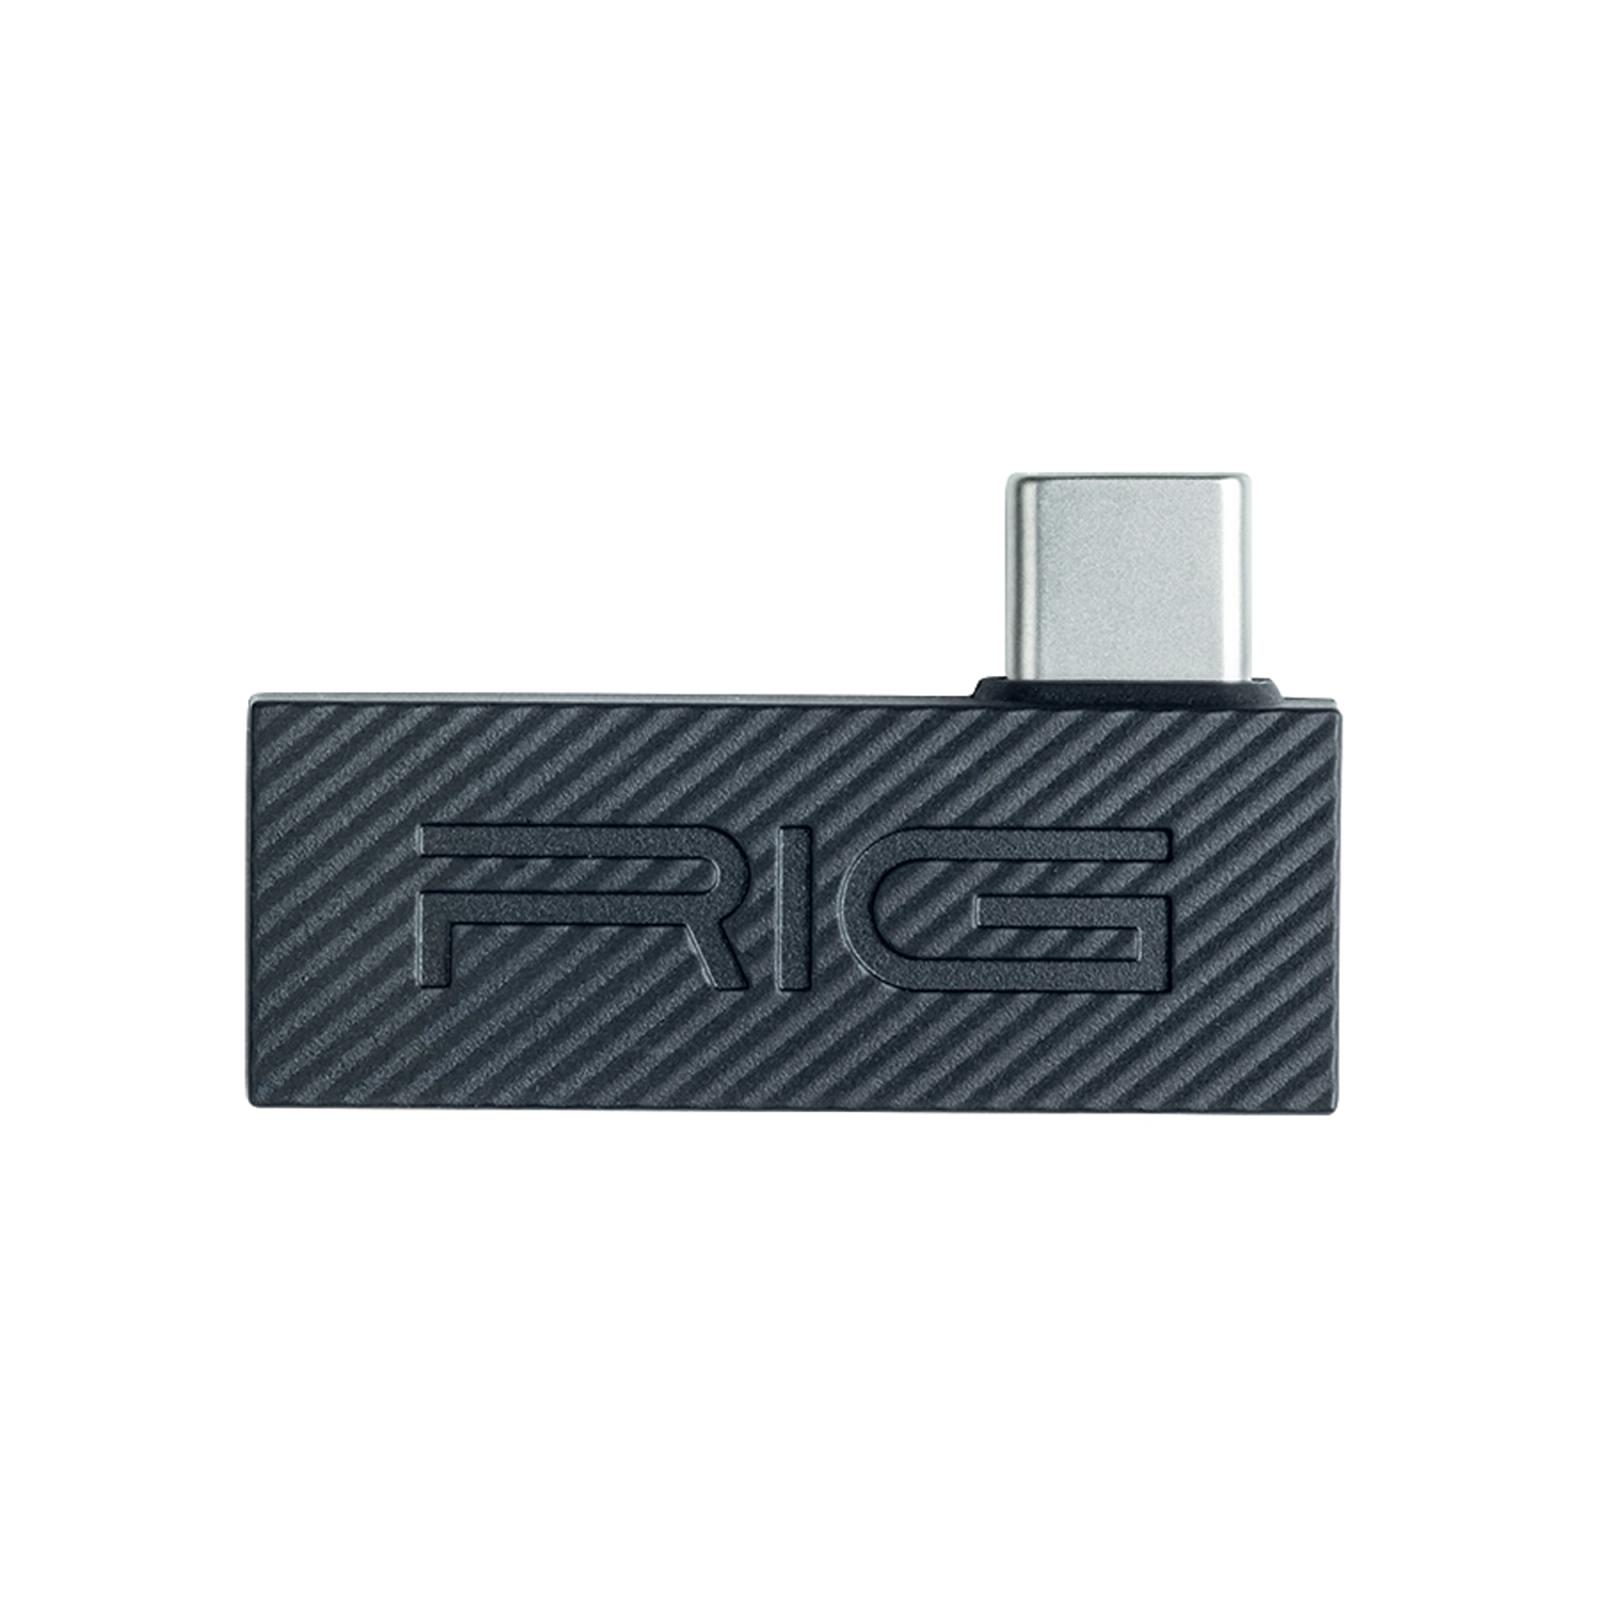 RIG 600 PRO HX review usb c adapter